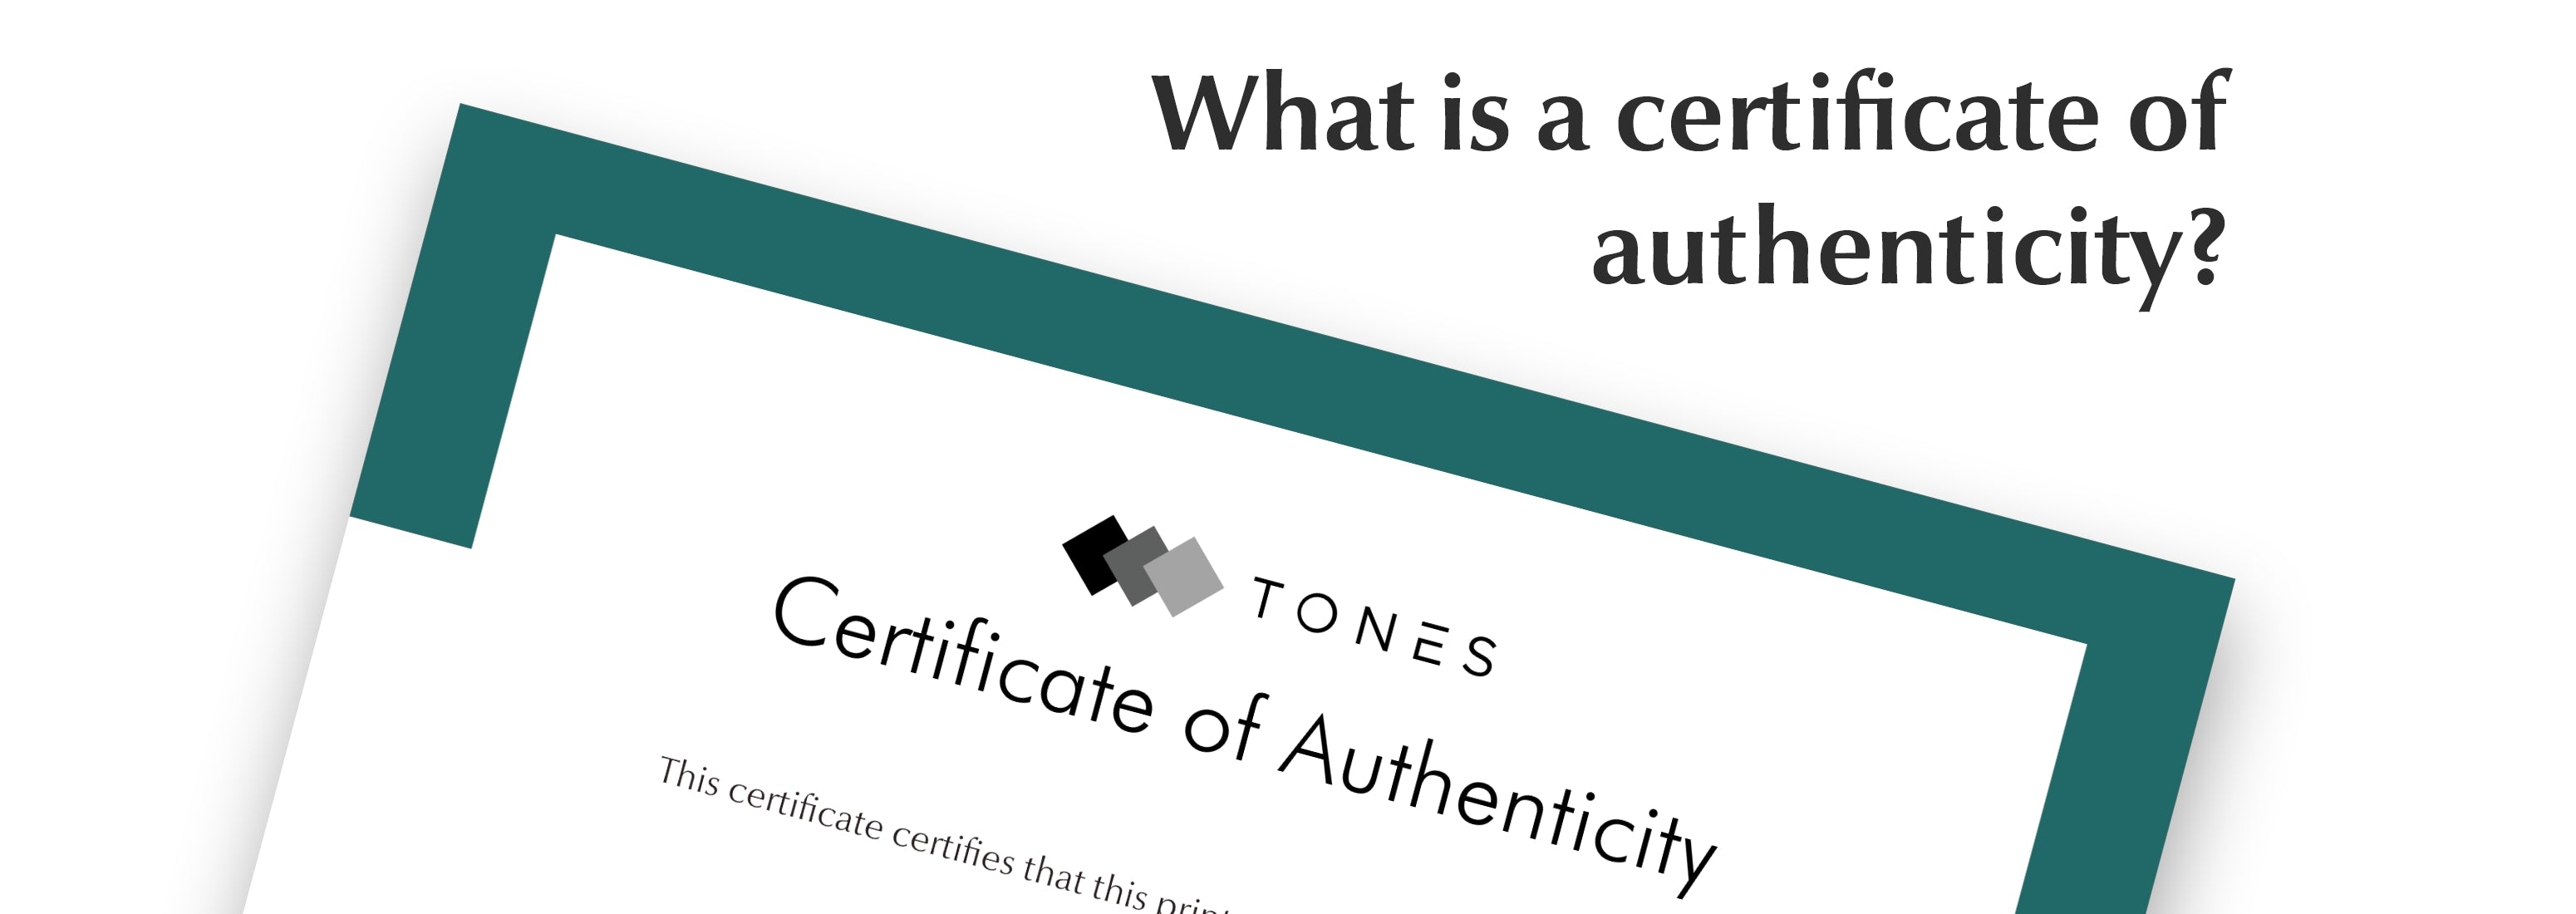 A Certificate of Authenticity: What is it and are they important ...